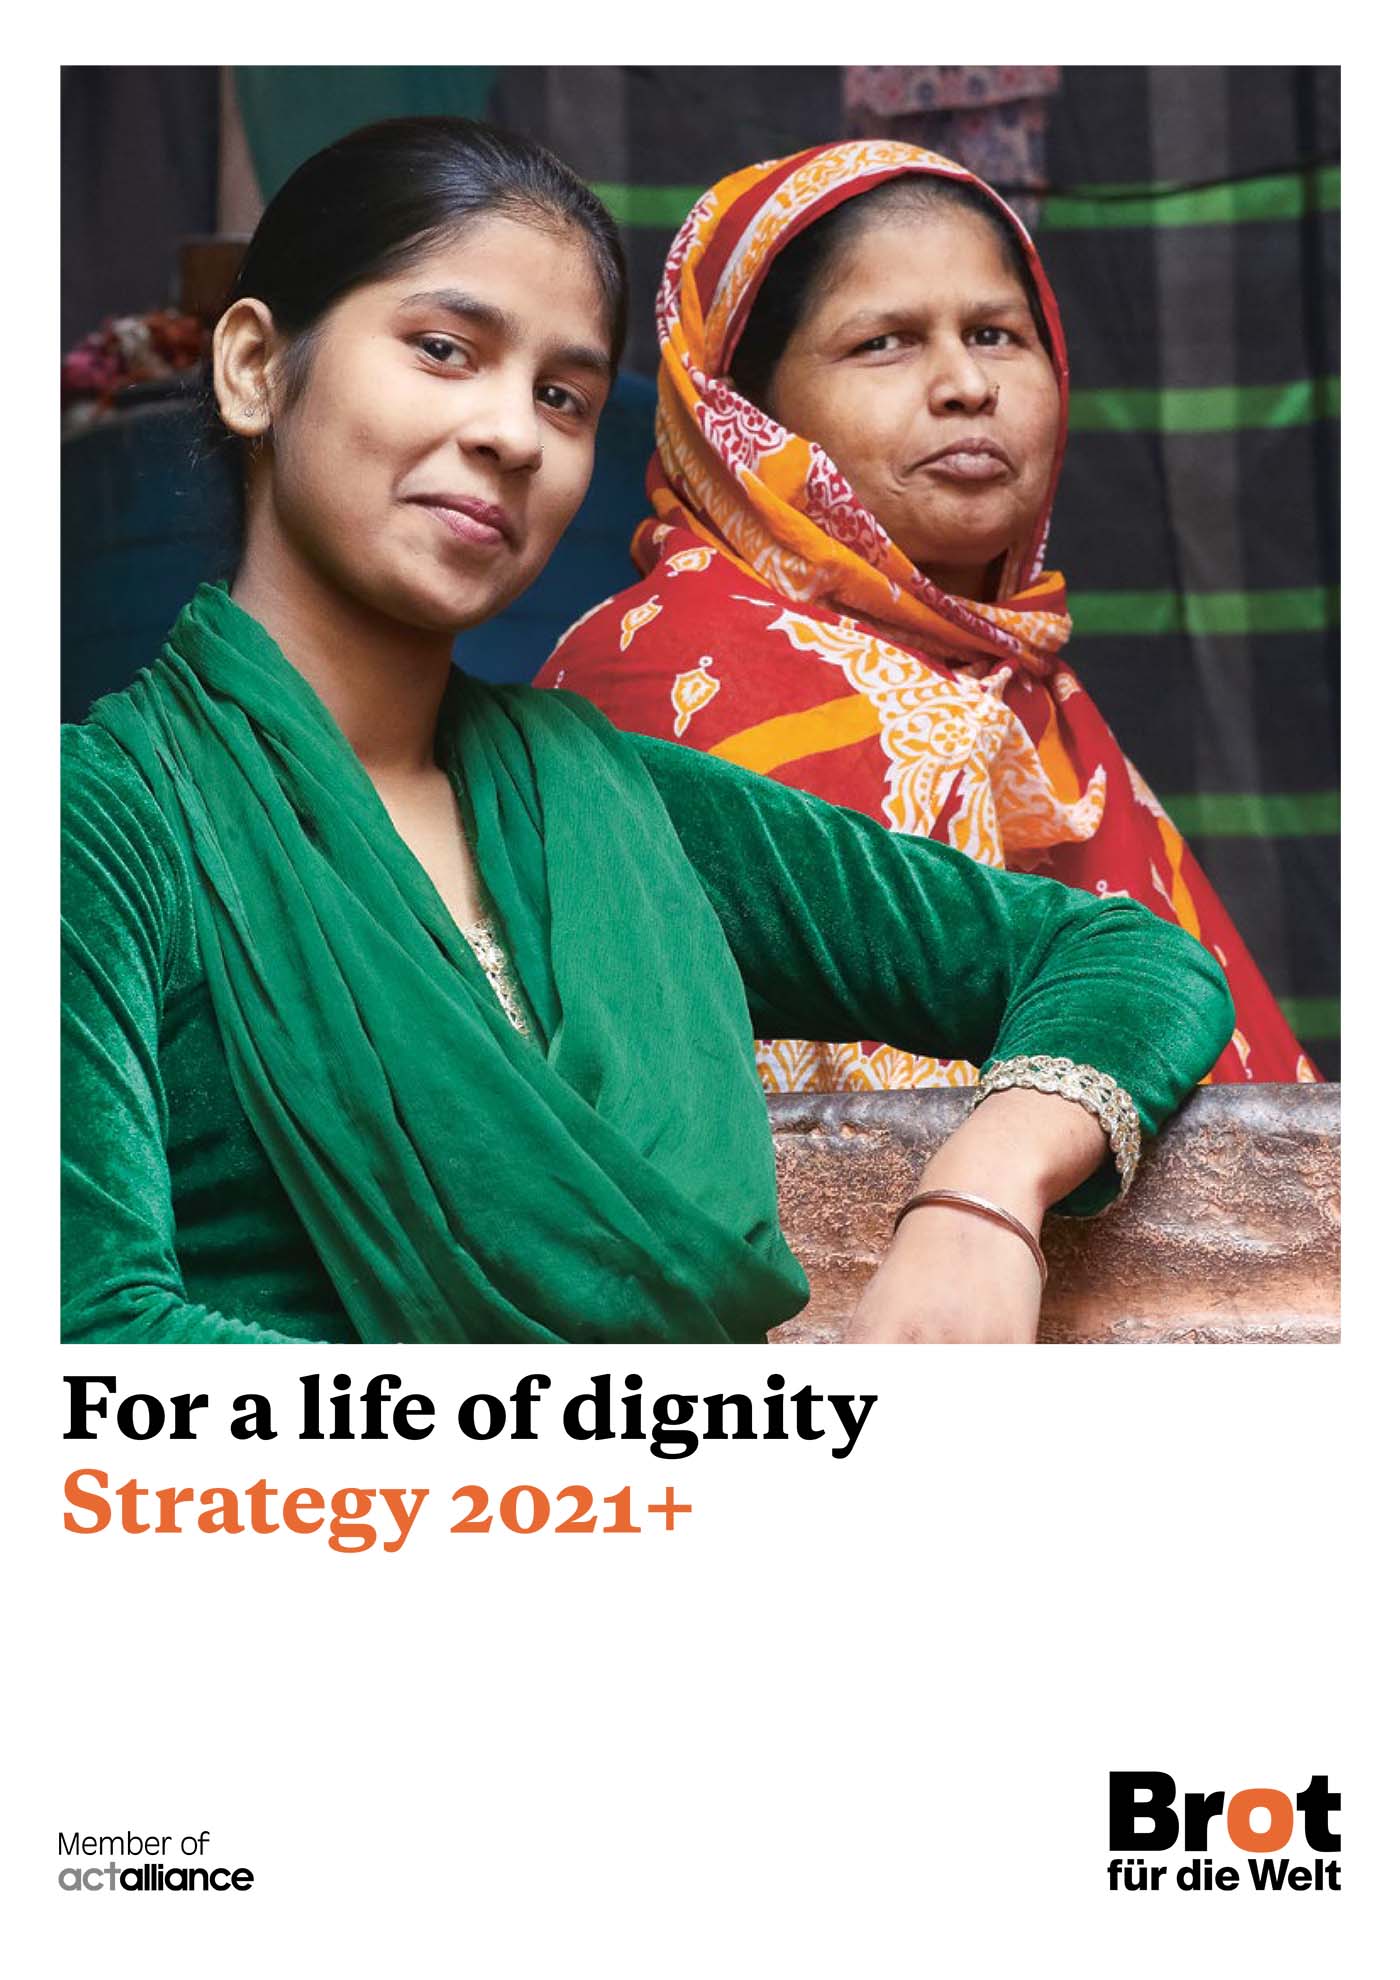 For a life of dignity - Strategy 2021+ (Strategiebroschüre Englisch)